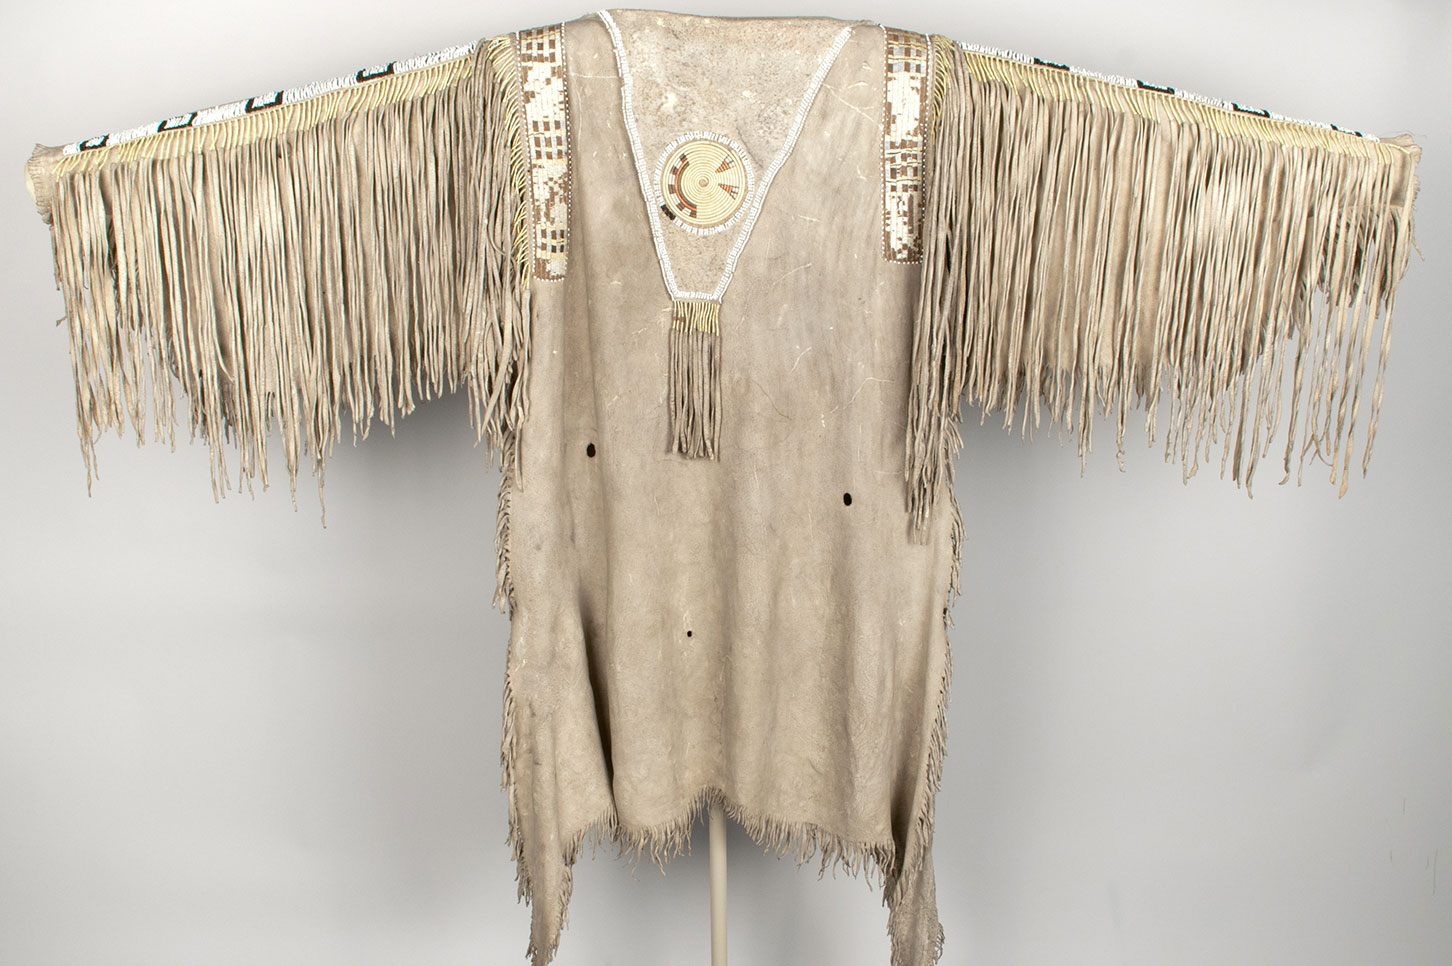 Man's cured hide shirt decorated with quillwork and black and white Venetian glass beads. Body of the shirt is of the two-skin style with hair side outward and head section at top.